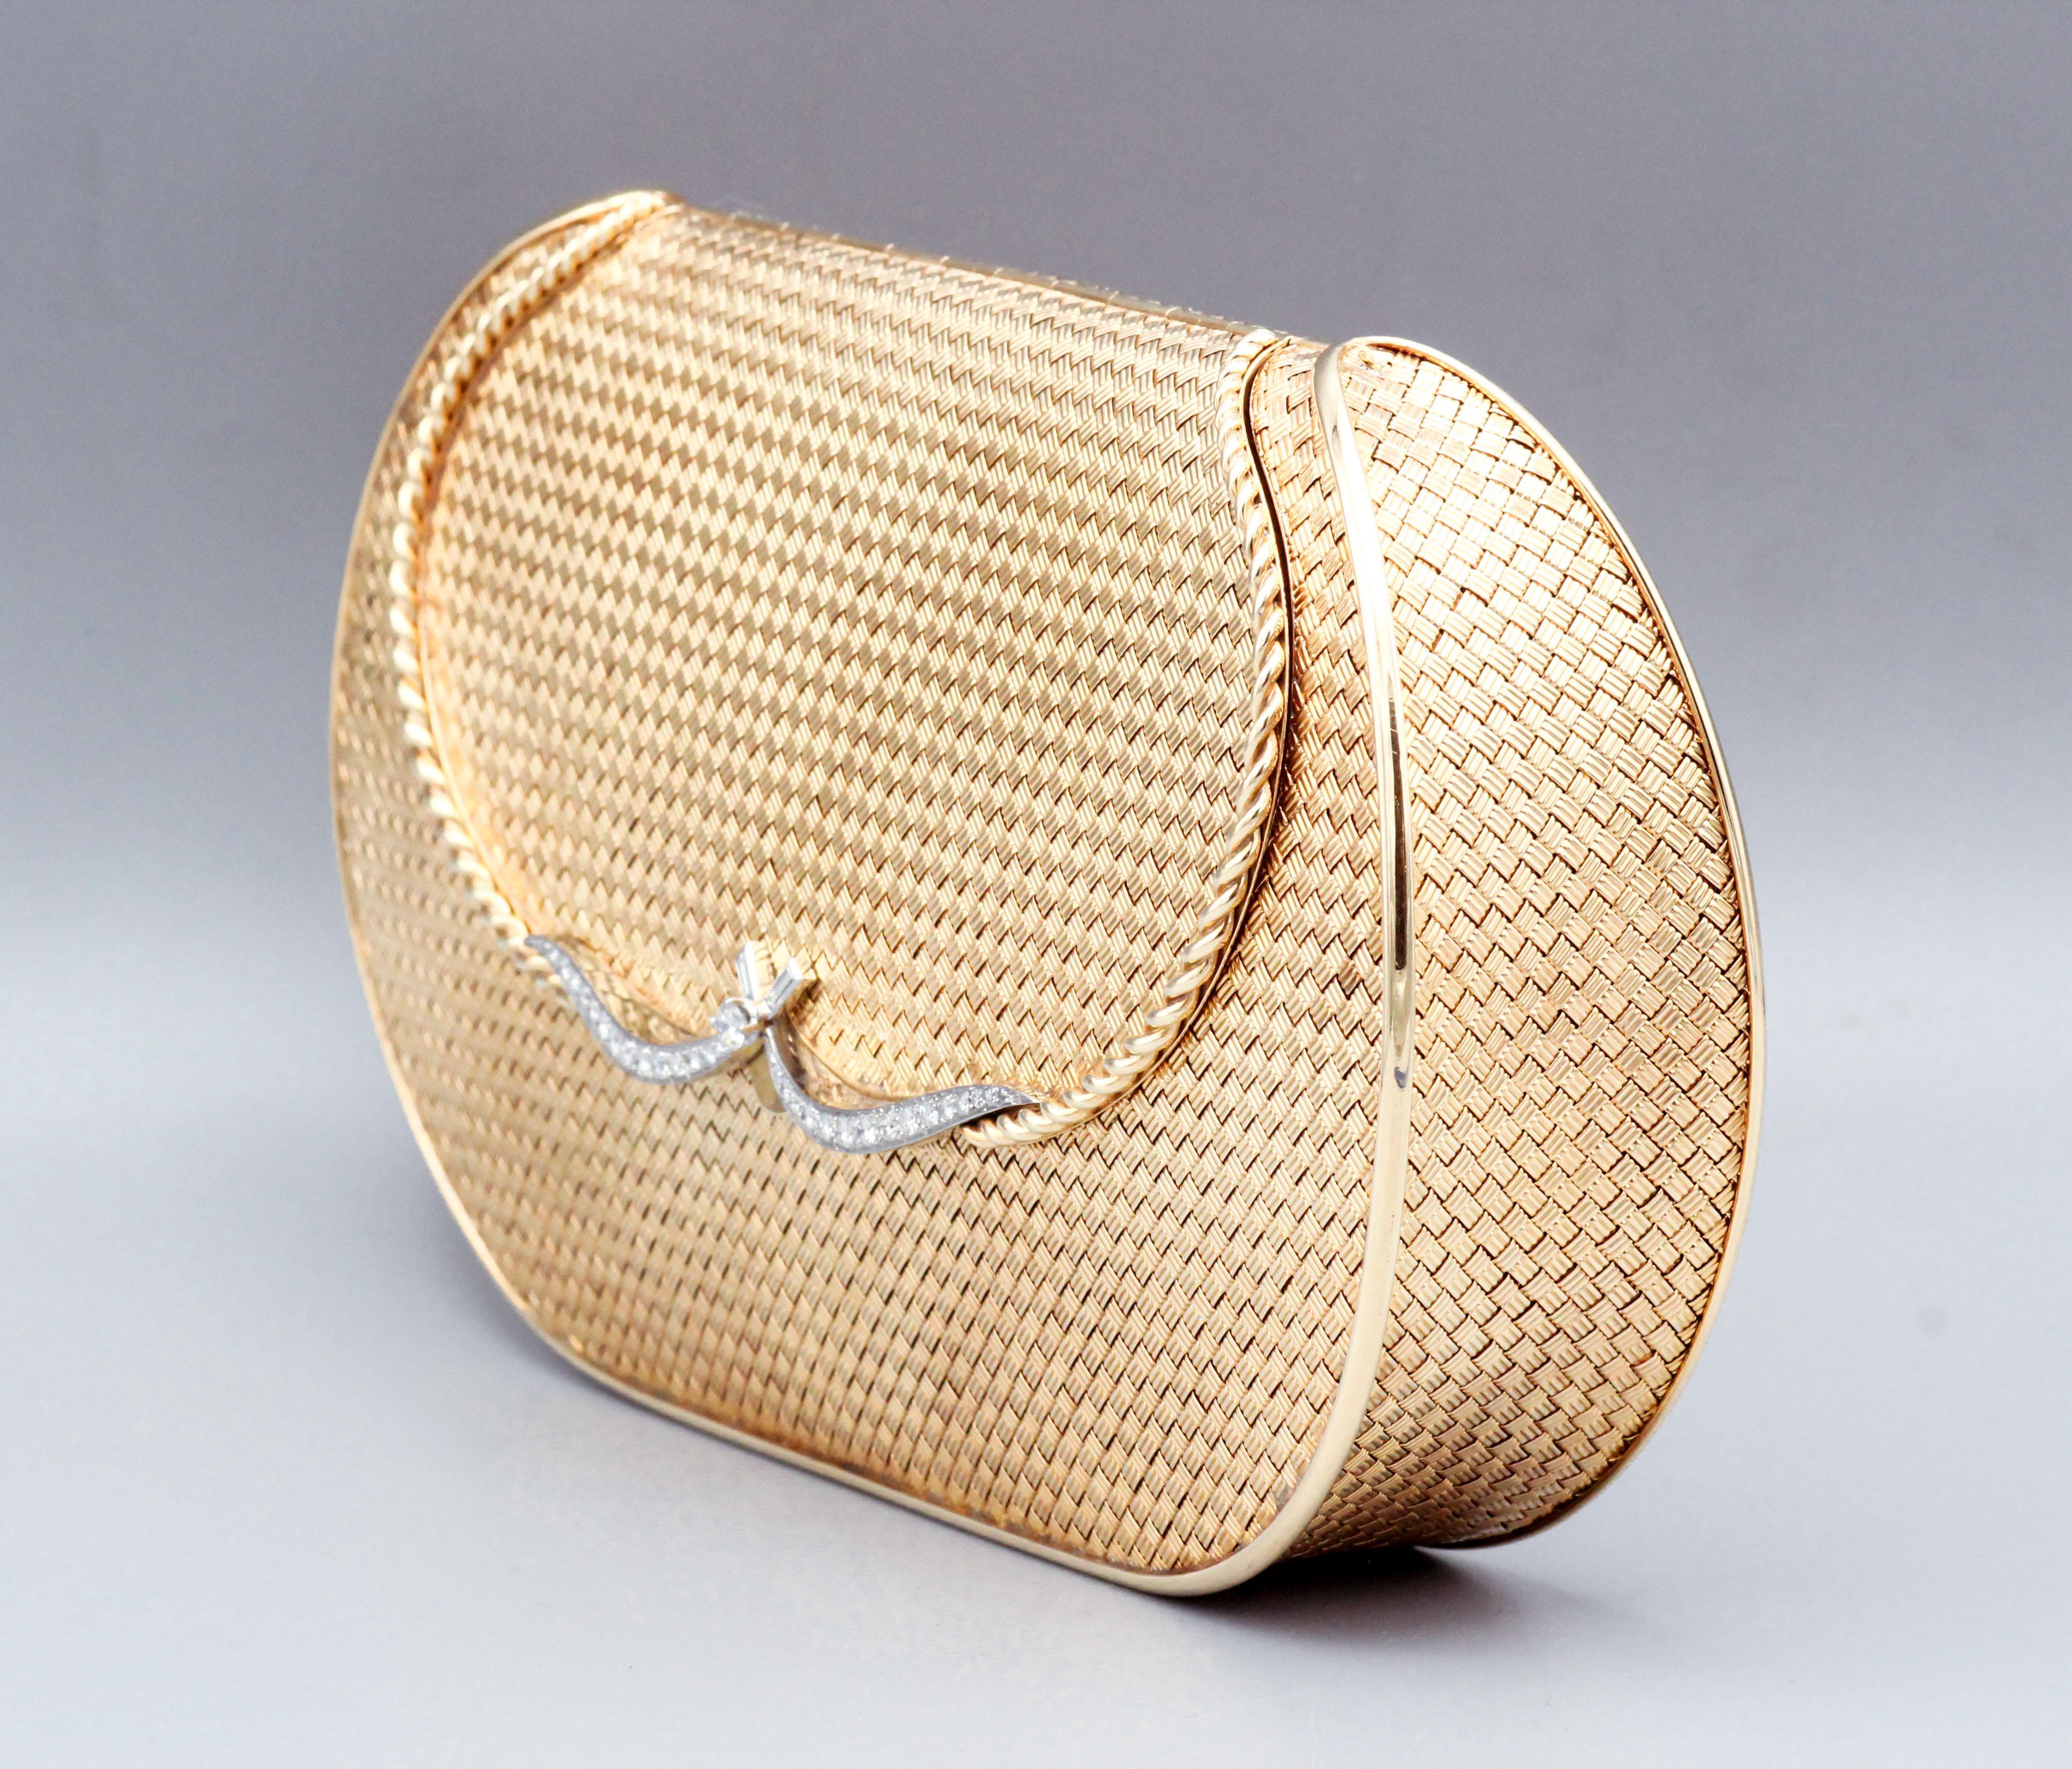 Enter into a world of timeless glamour with this exquisite French-made Diamond set platinum and 18 Karat gold basket eave clutch purse, a true masterpiece of mid-century craftsmanship. Crafted in the 1960s, this piece exudes the elegance and